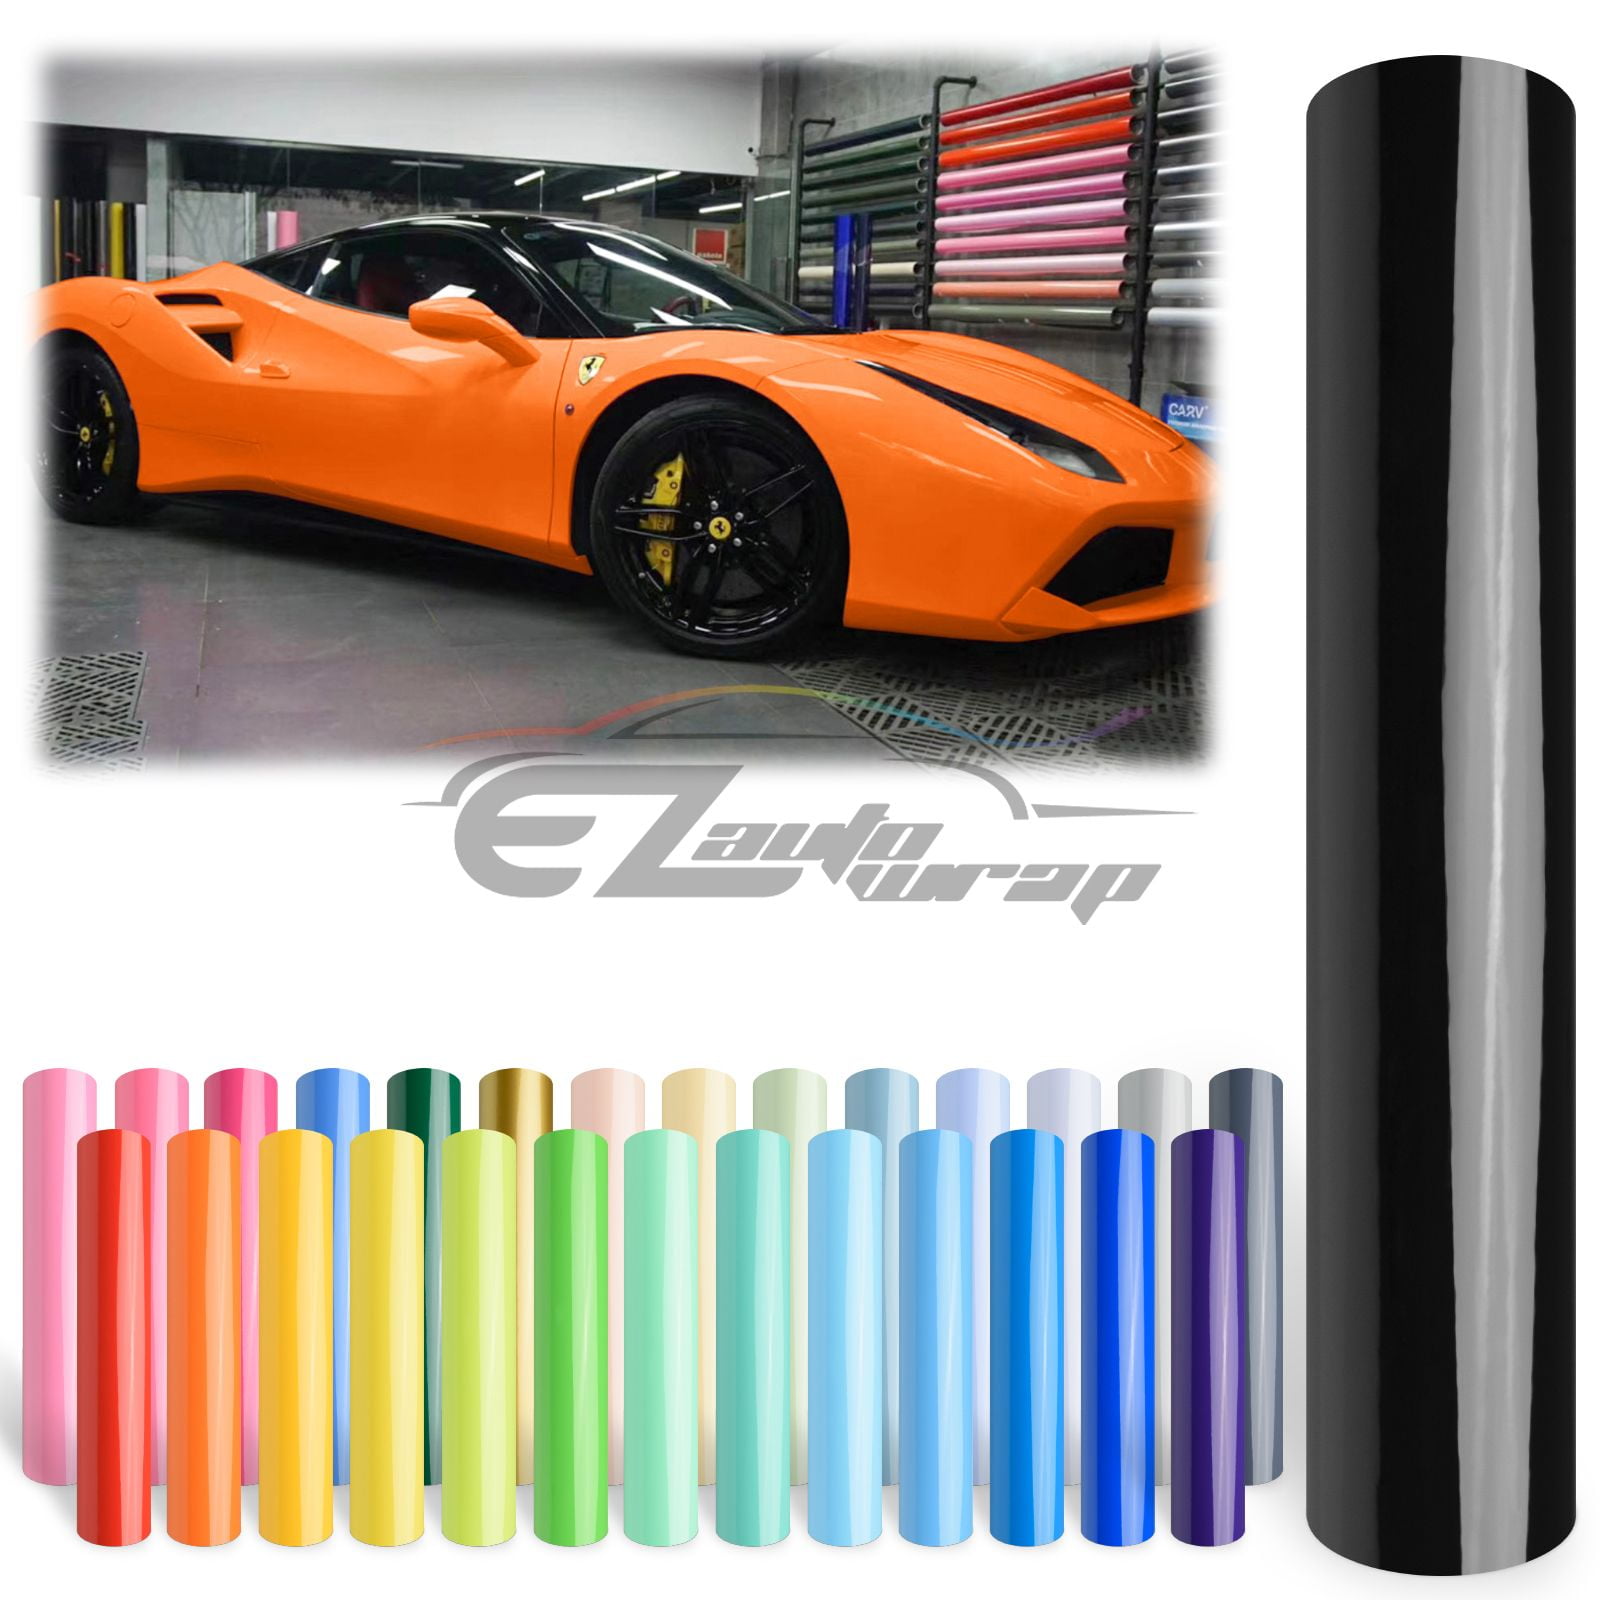 60" x 96" Inch Gloss Orange Glossy Vinyl Wrap Film Decal Bubble Free Air Release